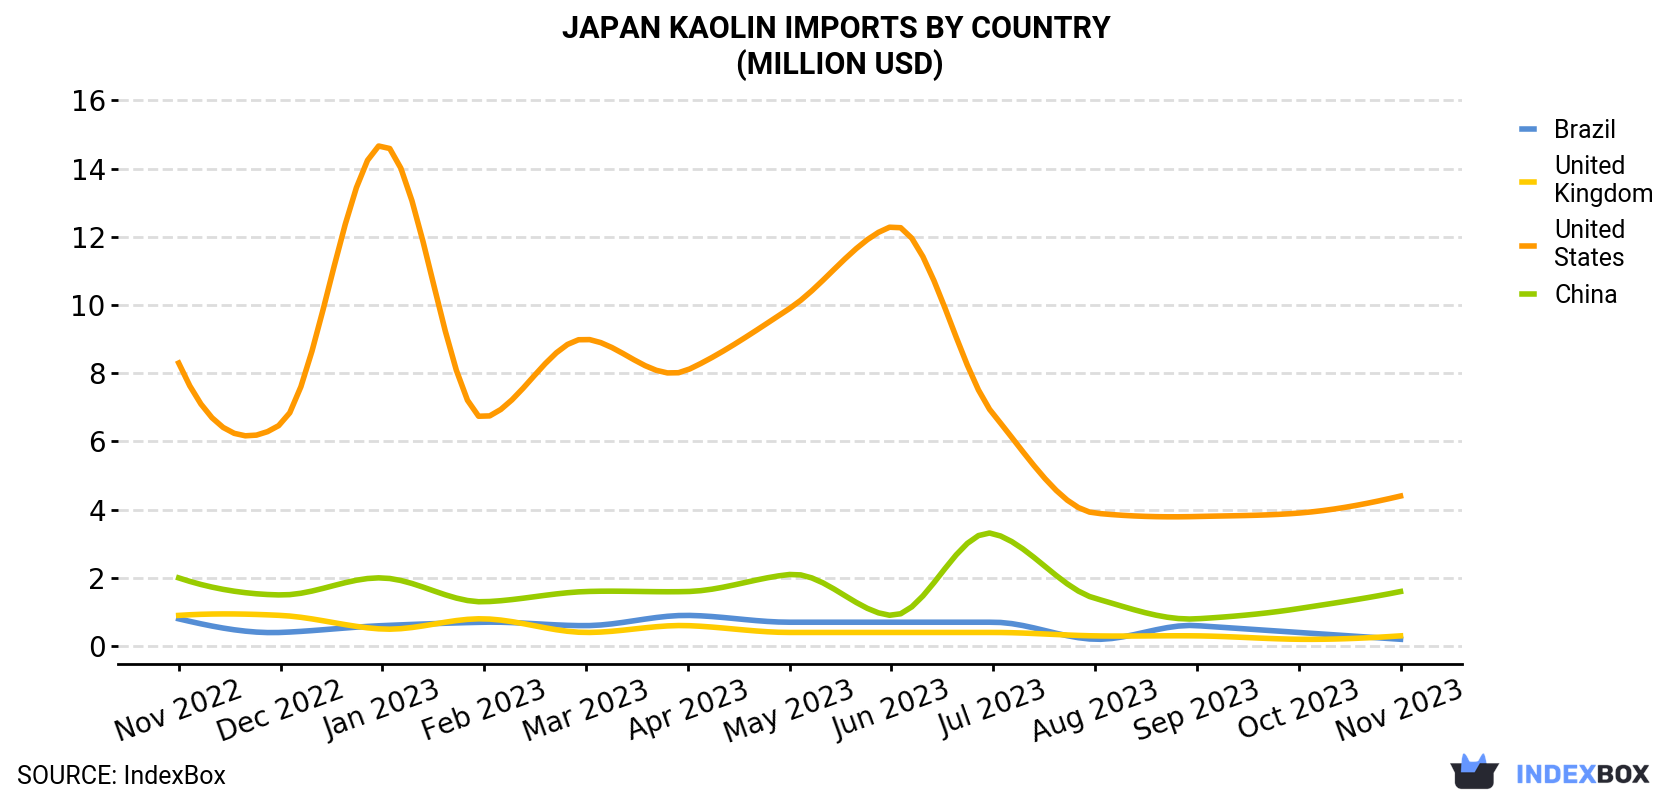 Japan Kaolin Imports By Country (Million USD)